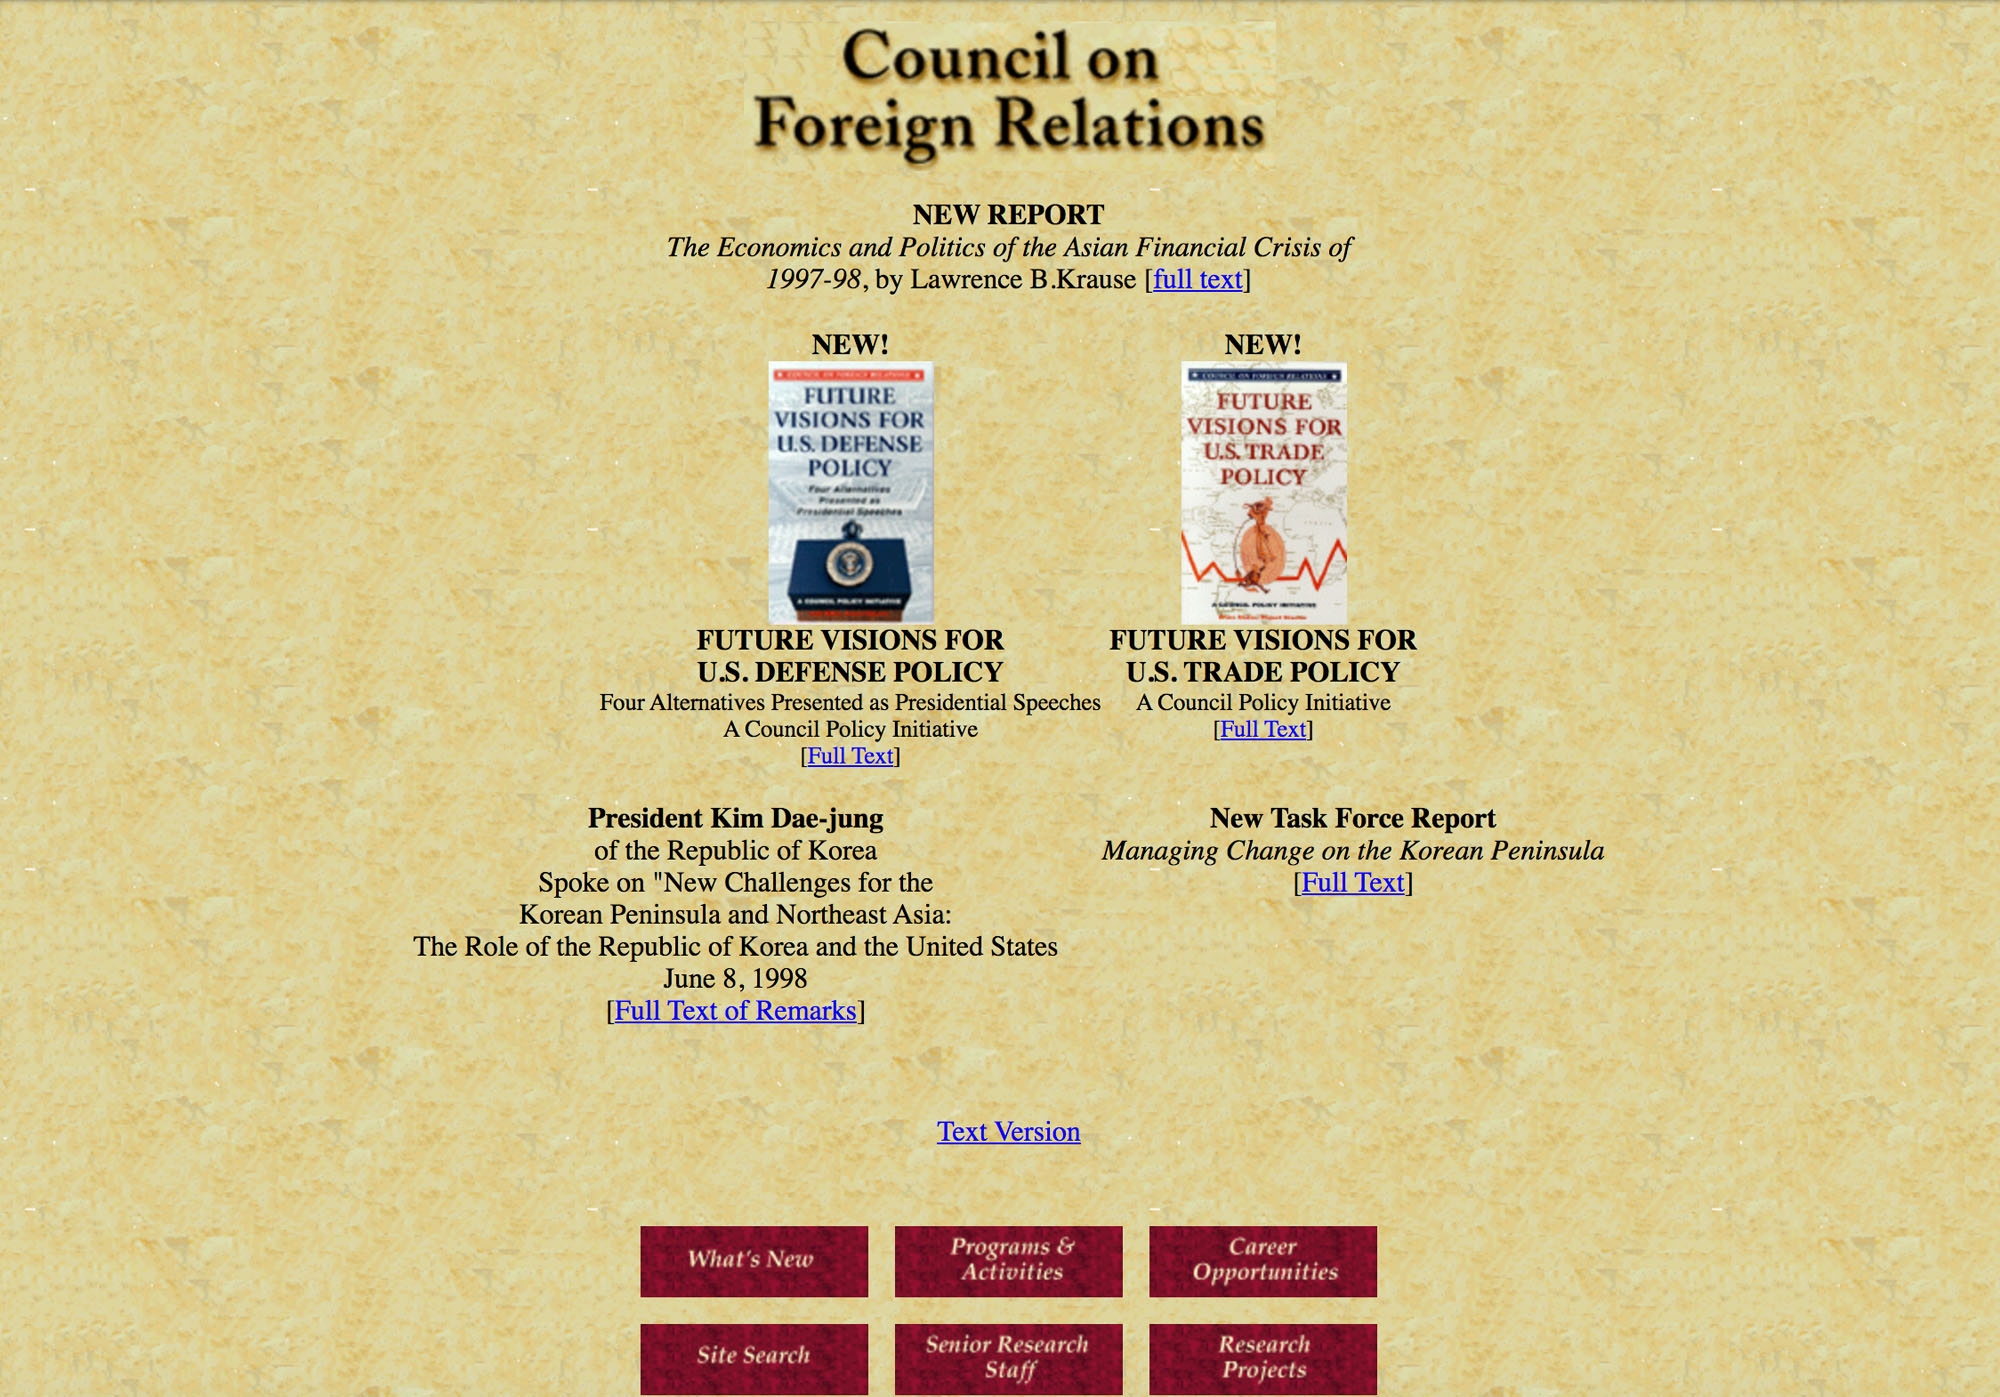 CFR launches its website, foreignrelations.org